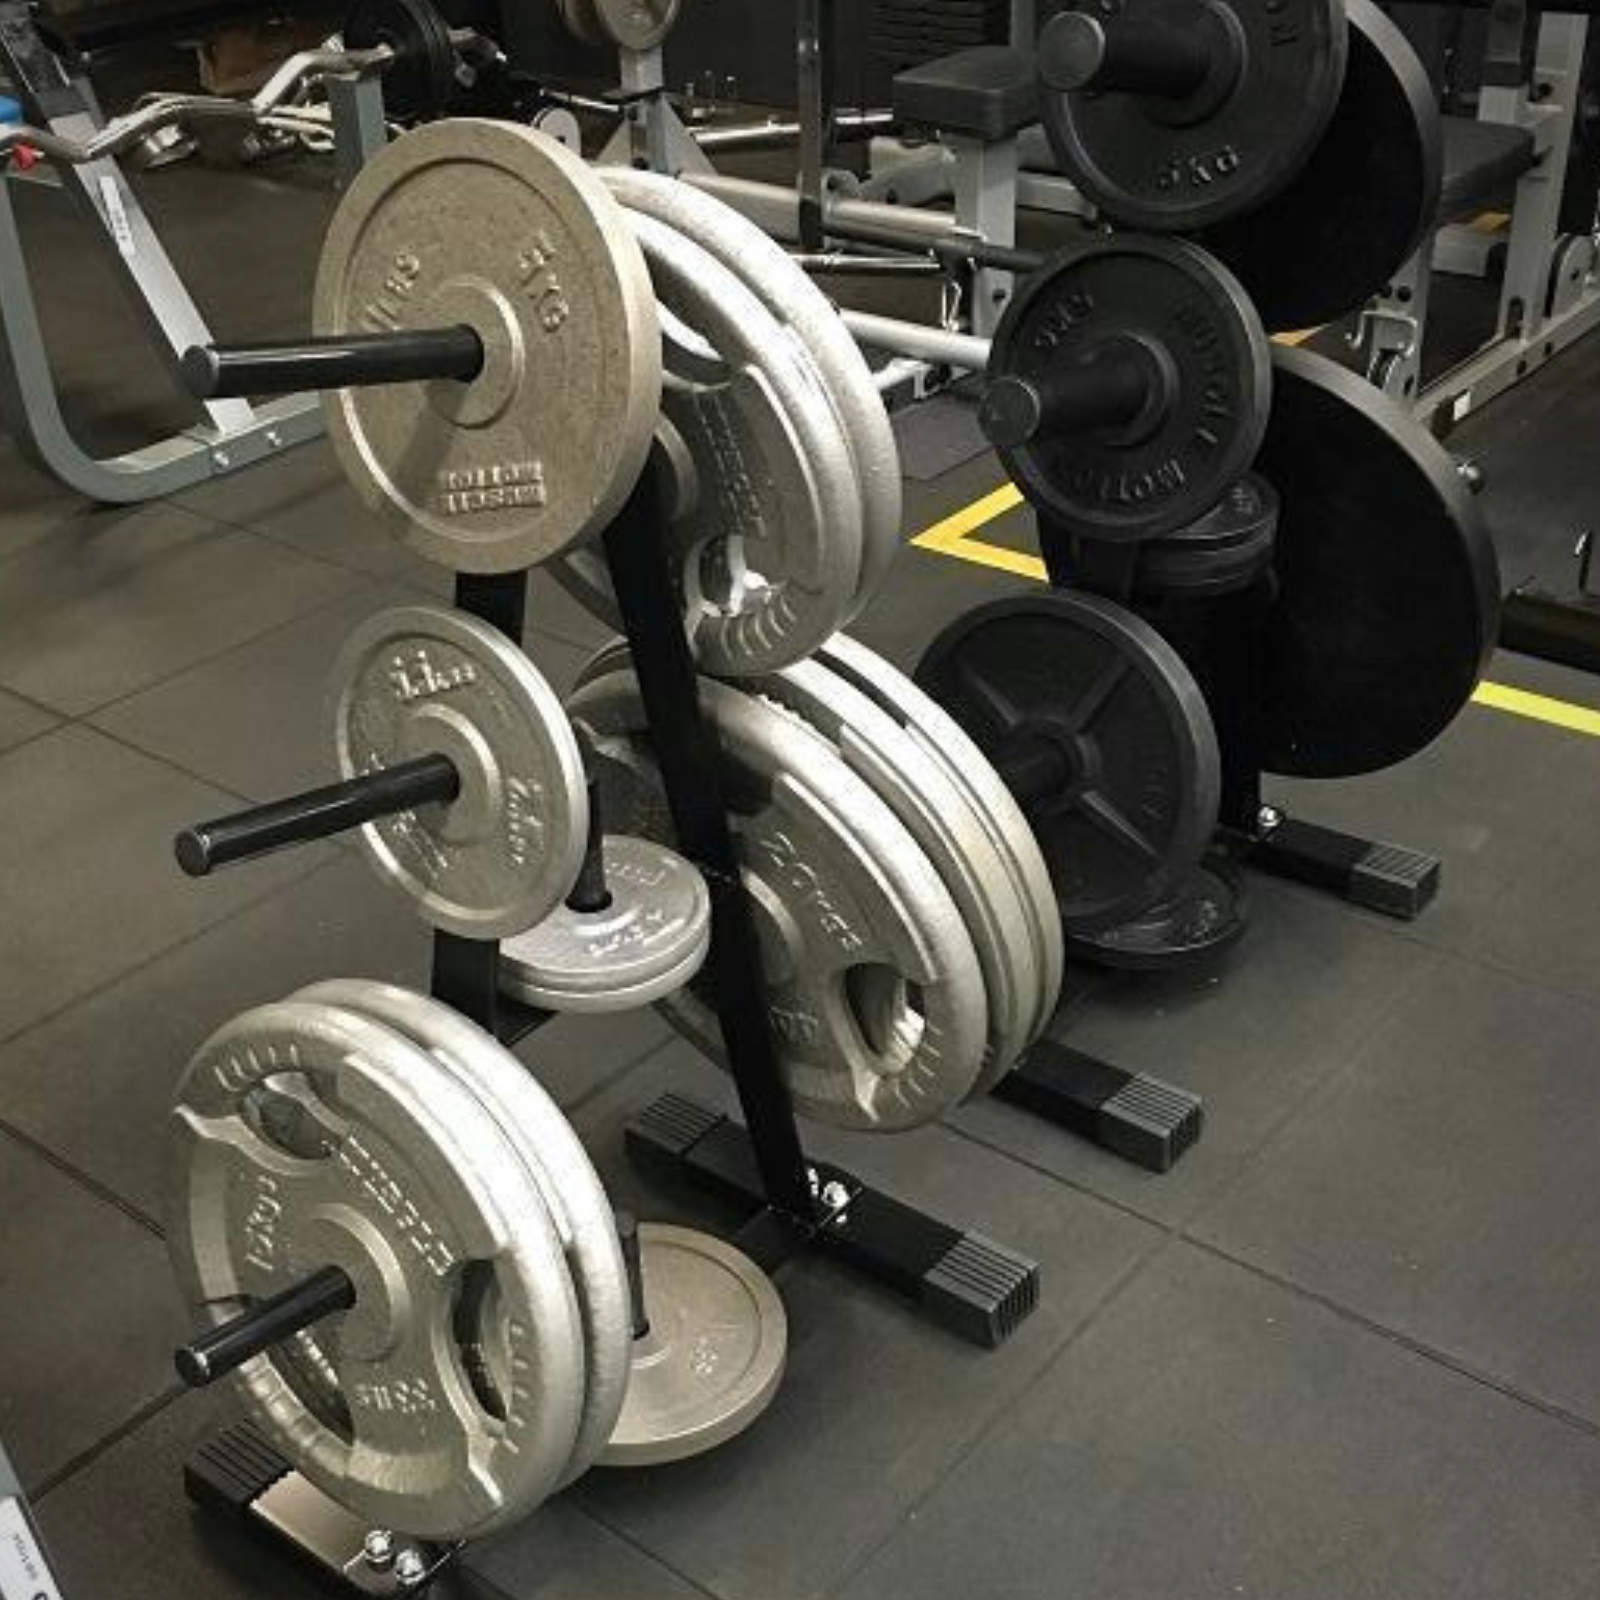 Muscle Motion Standard Weight Plate Rack-Gym Direct